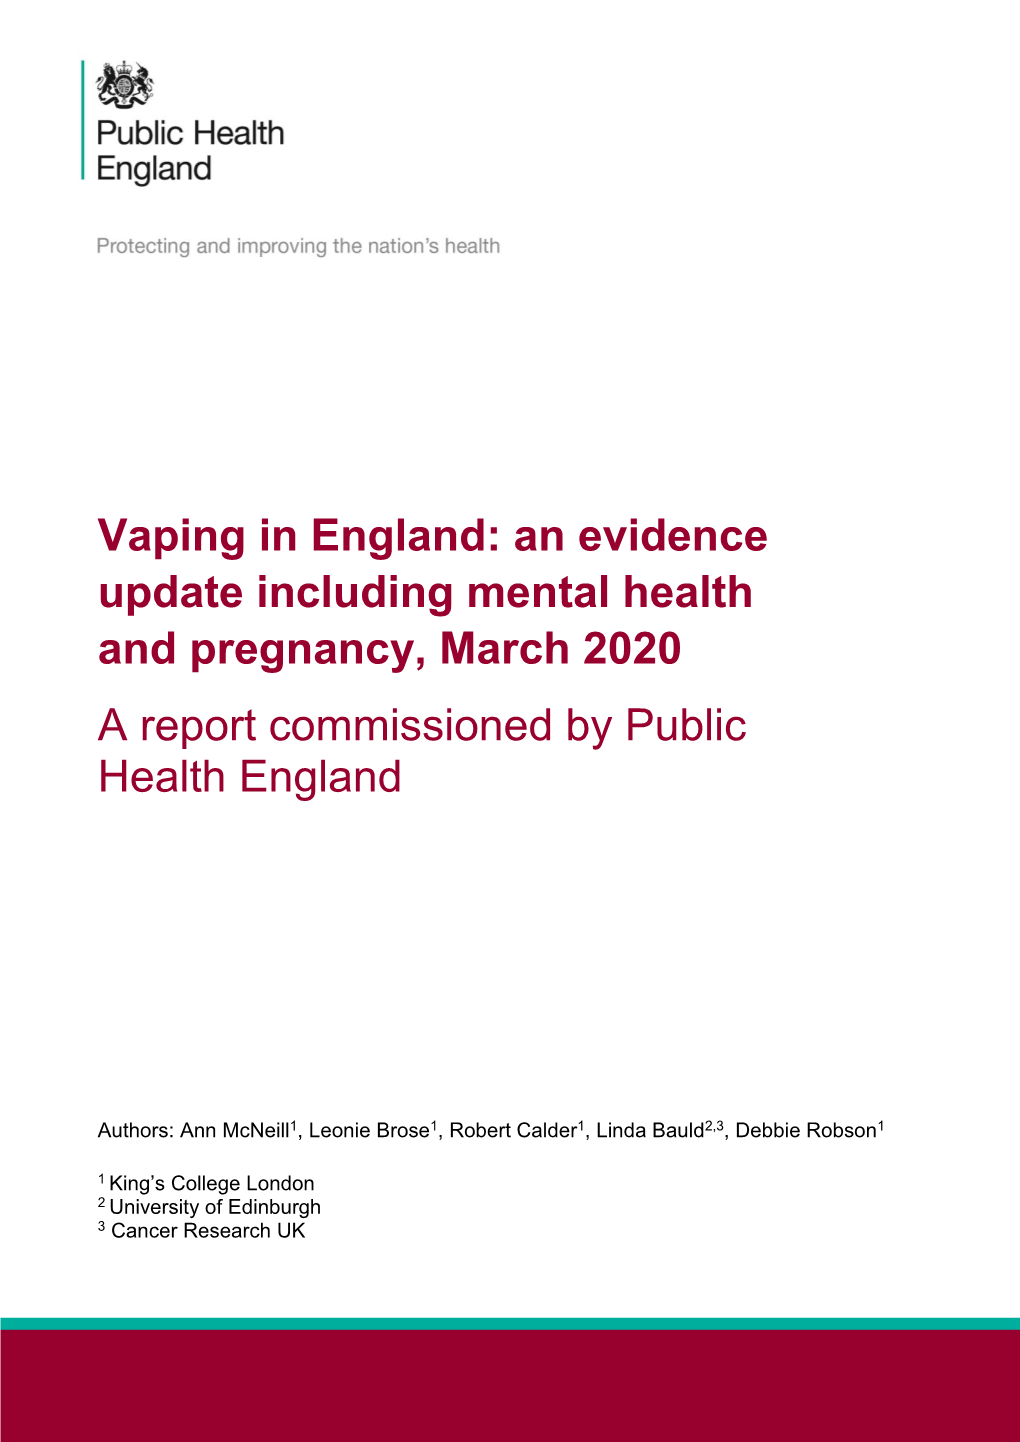 Vaping in England: an Evidence Update Including Mental Health and Pregnancy, March 2020